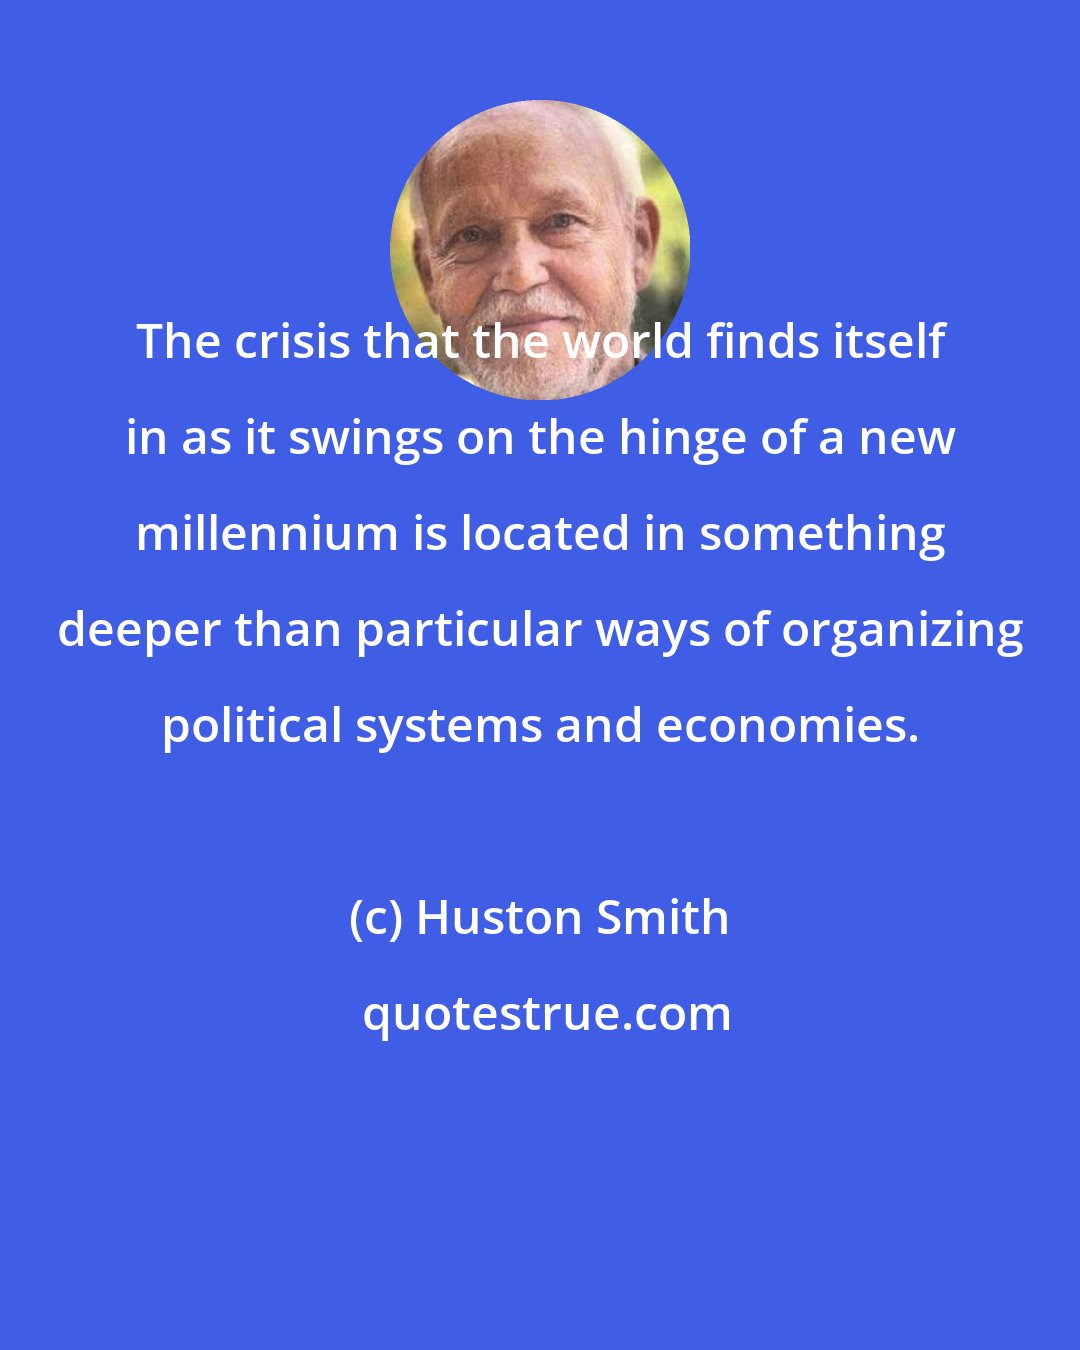 Huston Smith: The crisis that the world finds itself in as it swings on the hinge of a new millennium is located in something deeper than particular ways of organizing political systems and economies.